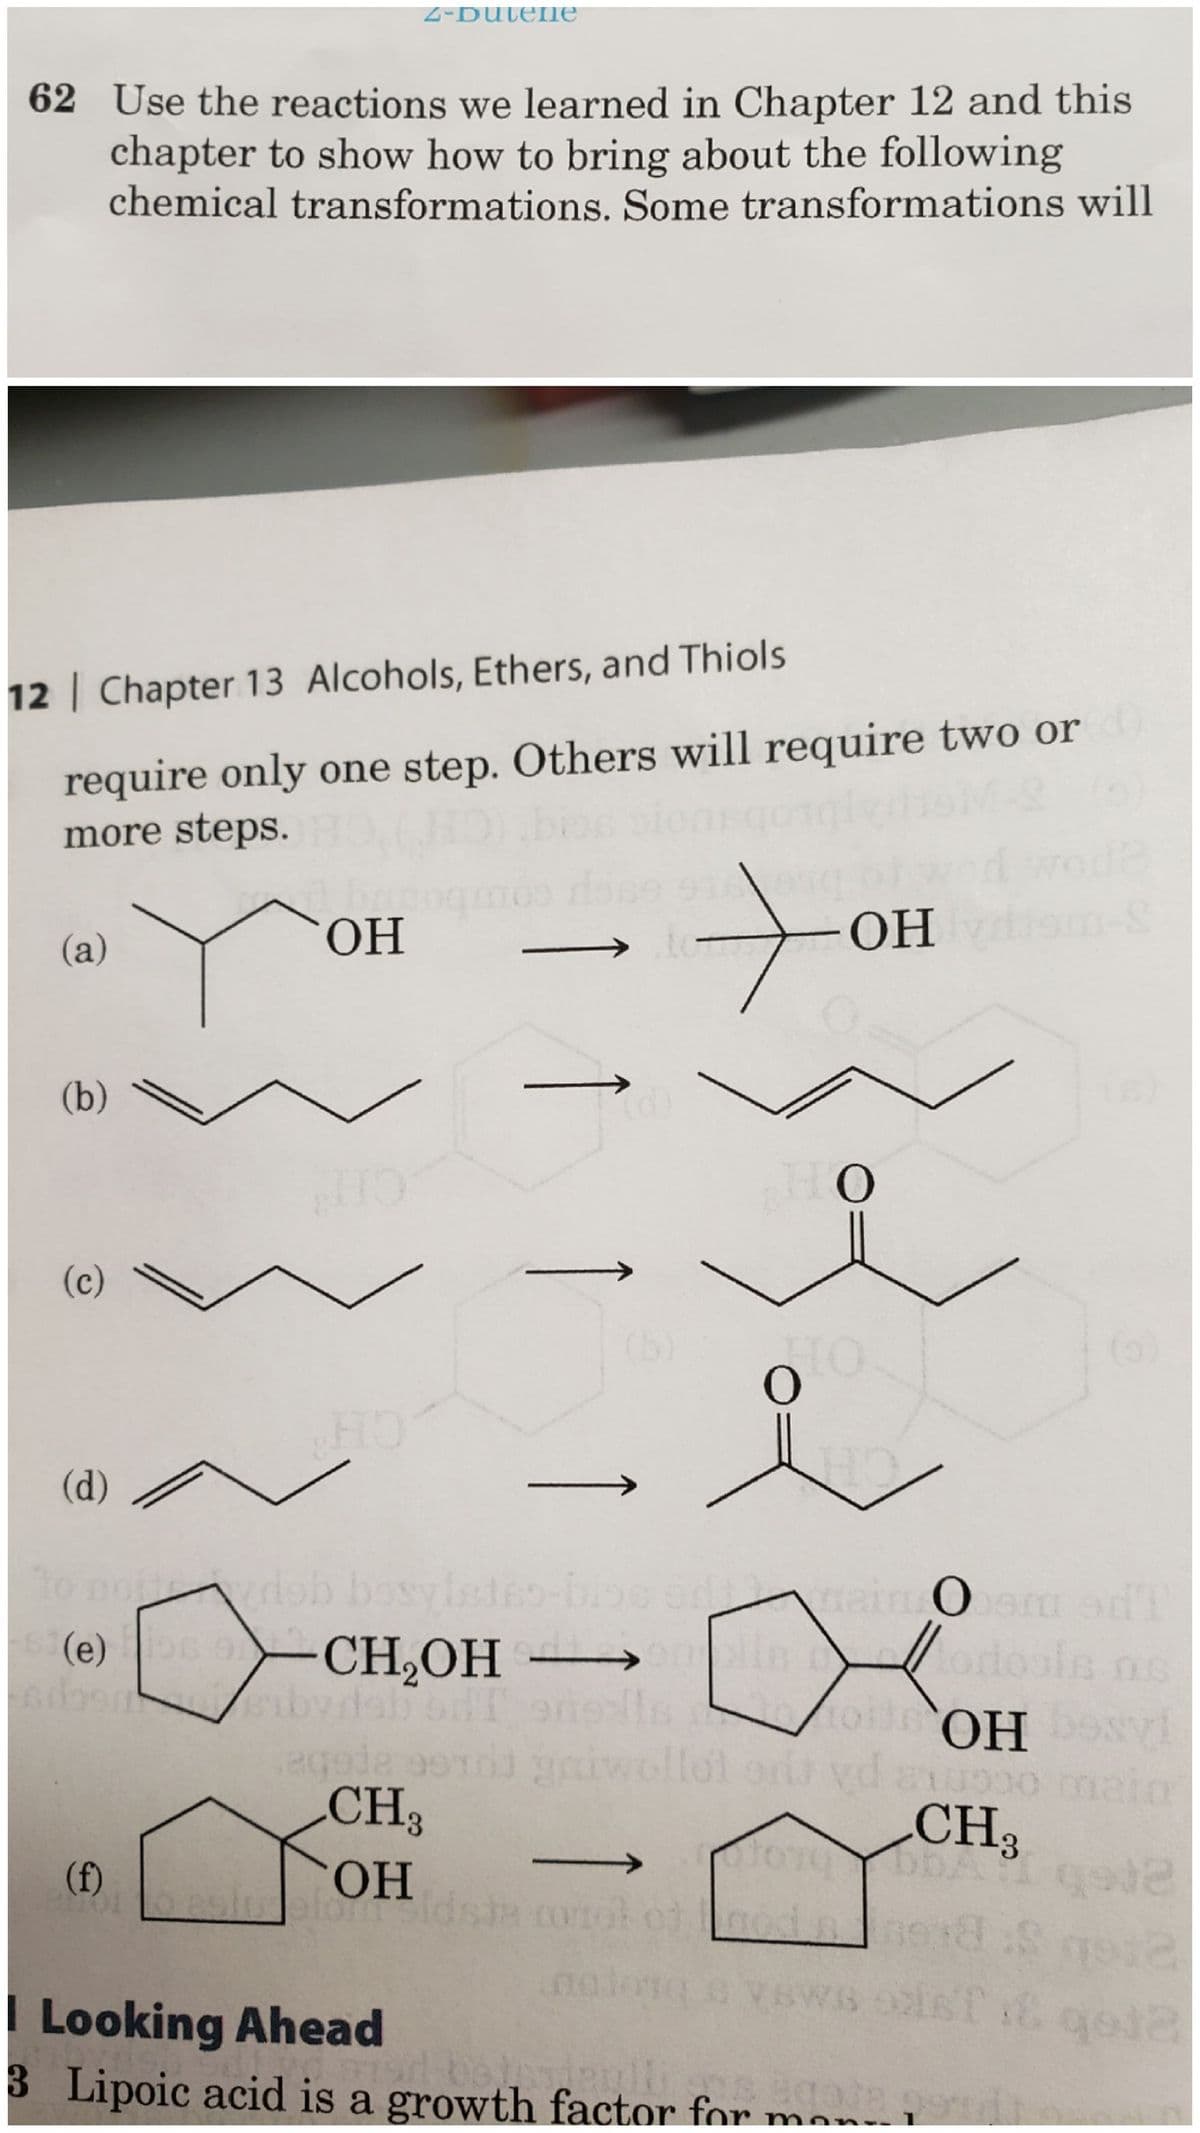 62 Use the reactions we learned in Chapter 12 and this
chapter to show how to bring about the following
chemical transformations. Some transformations will
12 | Chapter 13 Alcohols, Ethers, and Thiols
require only one step. Others will require two or
more steps.
(a)
(b)\
(c)
(d)
2-Dutene
OH
(f)
HO
to
orydob bosylstso-bioe en
(e)s -CH₂OH →→→→→→
IT onells
cor 01
OH
HO
O
main ber odl
O
он
eqede serdi griwollel oda yd axupoo main
CH3
CH3
OH
efort id
OH besvi
BWS IST & qo12
I Looking Ahead
3 Lipoic acid is a growth factor for mon